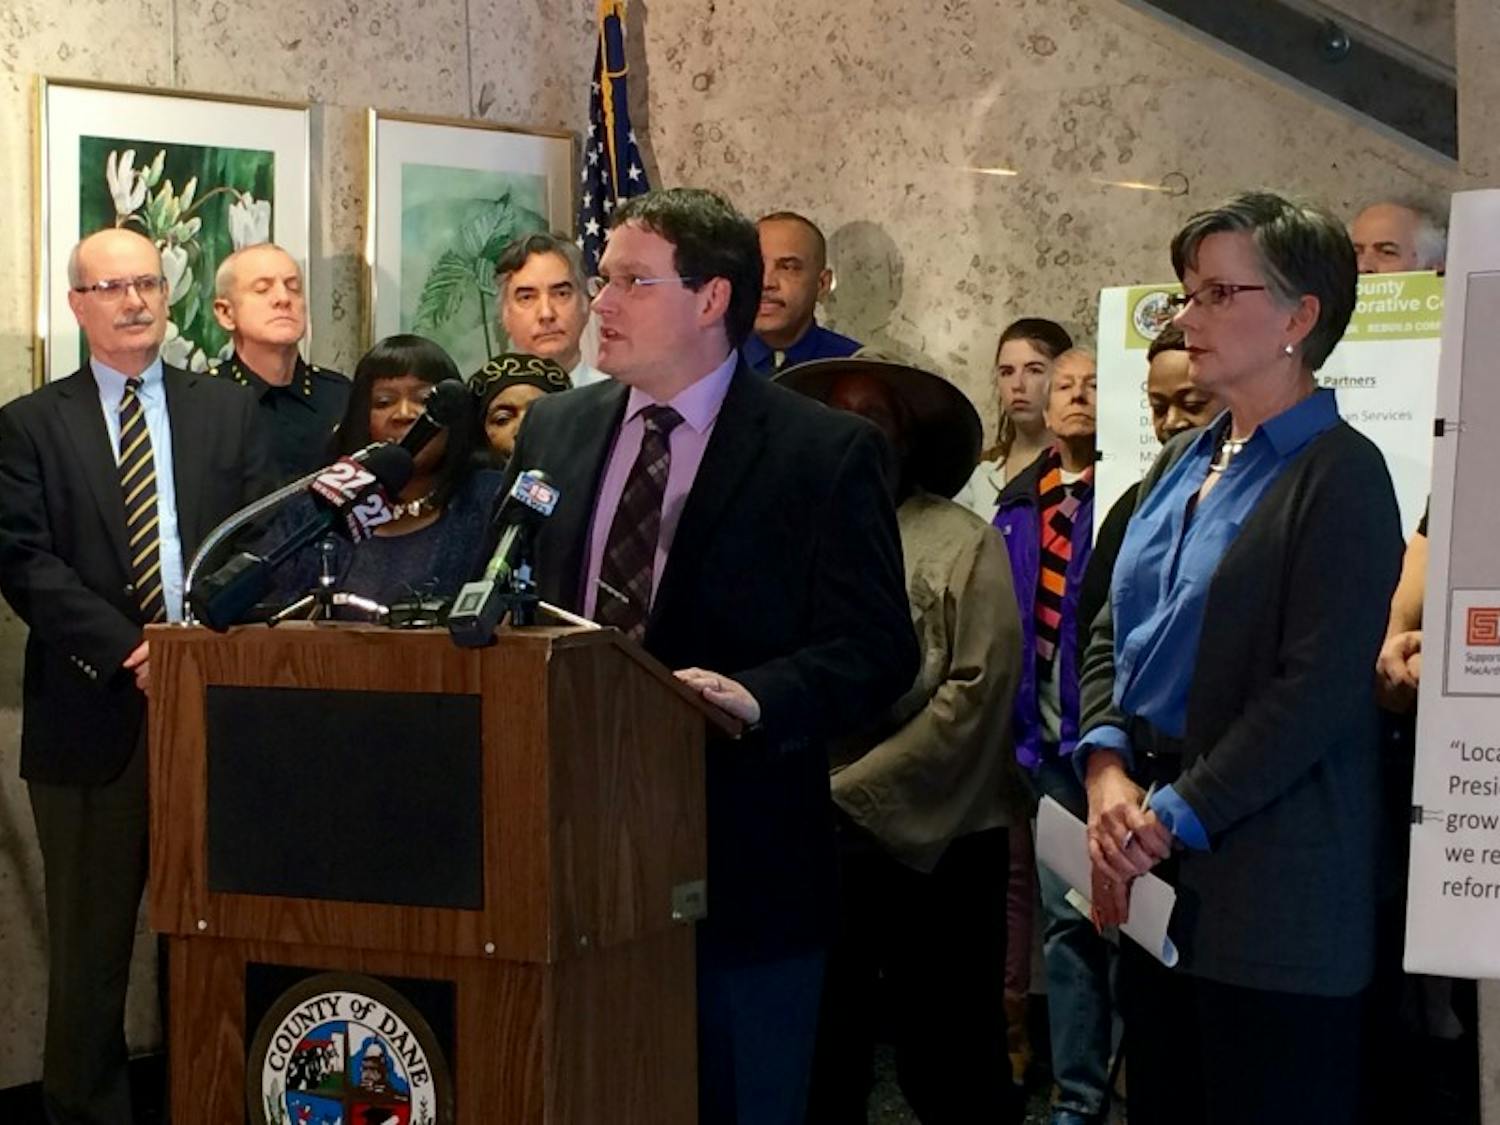 UW-Madison Law School professor Jonathan Sharrer said Wednesday that Dane County, which just received a $50,000 criminal justice reform grant, can be a national leader in the law enforcement system.